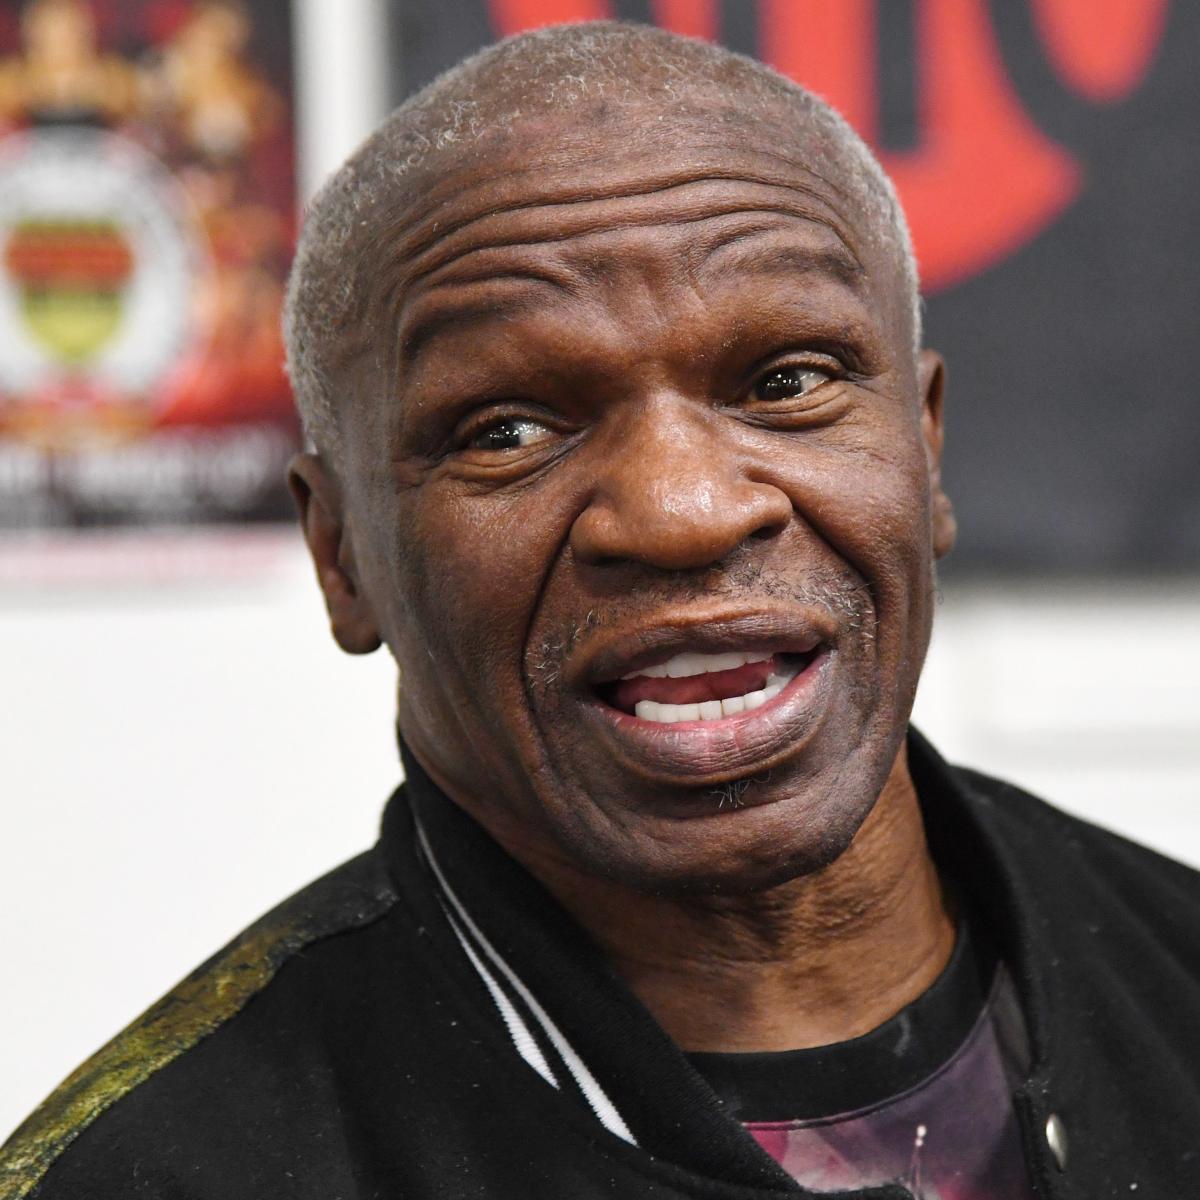 Floyd Mayweather Sr. on Conor McGregor: I'm Double His Age and I'd Whup His Ass ...